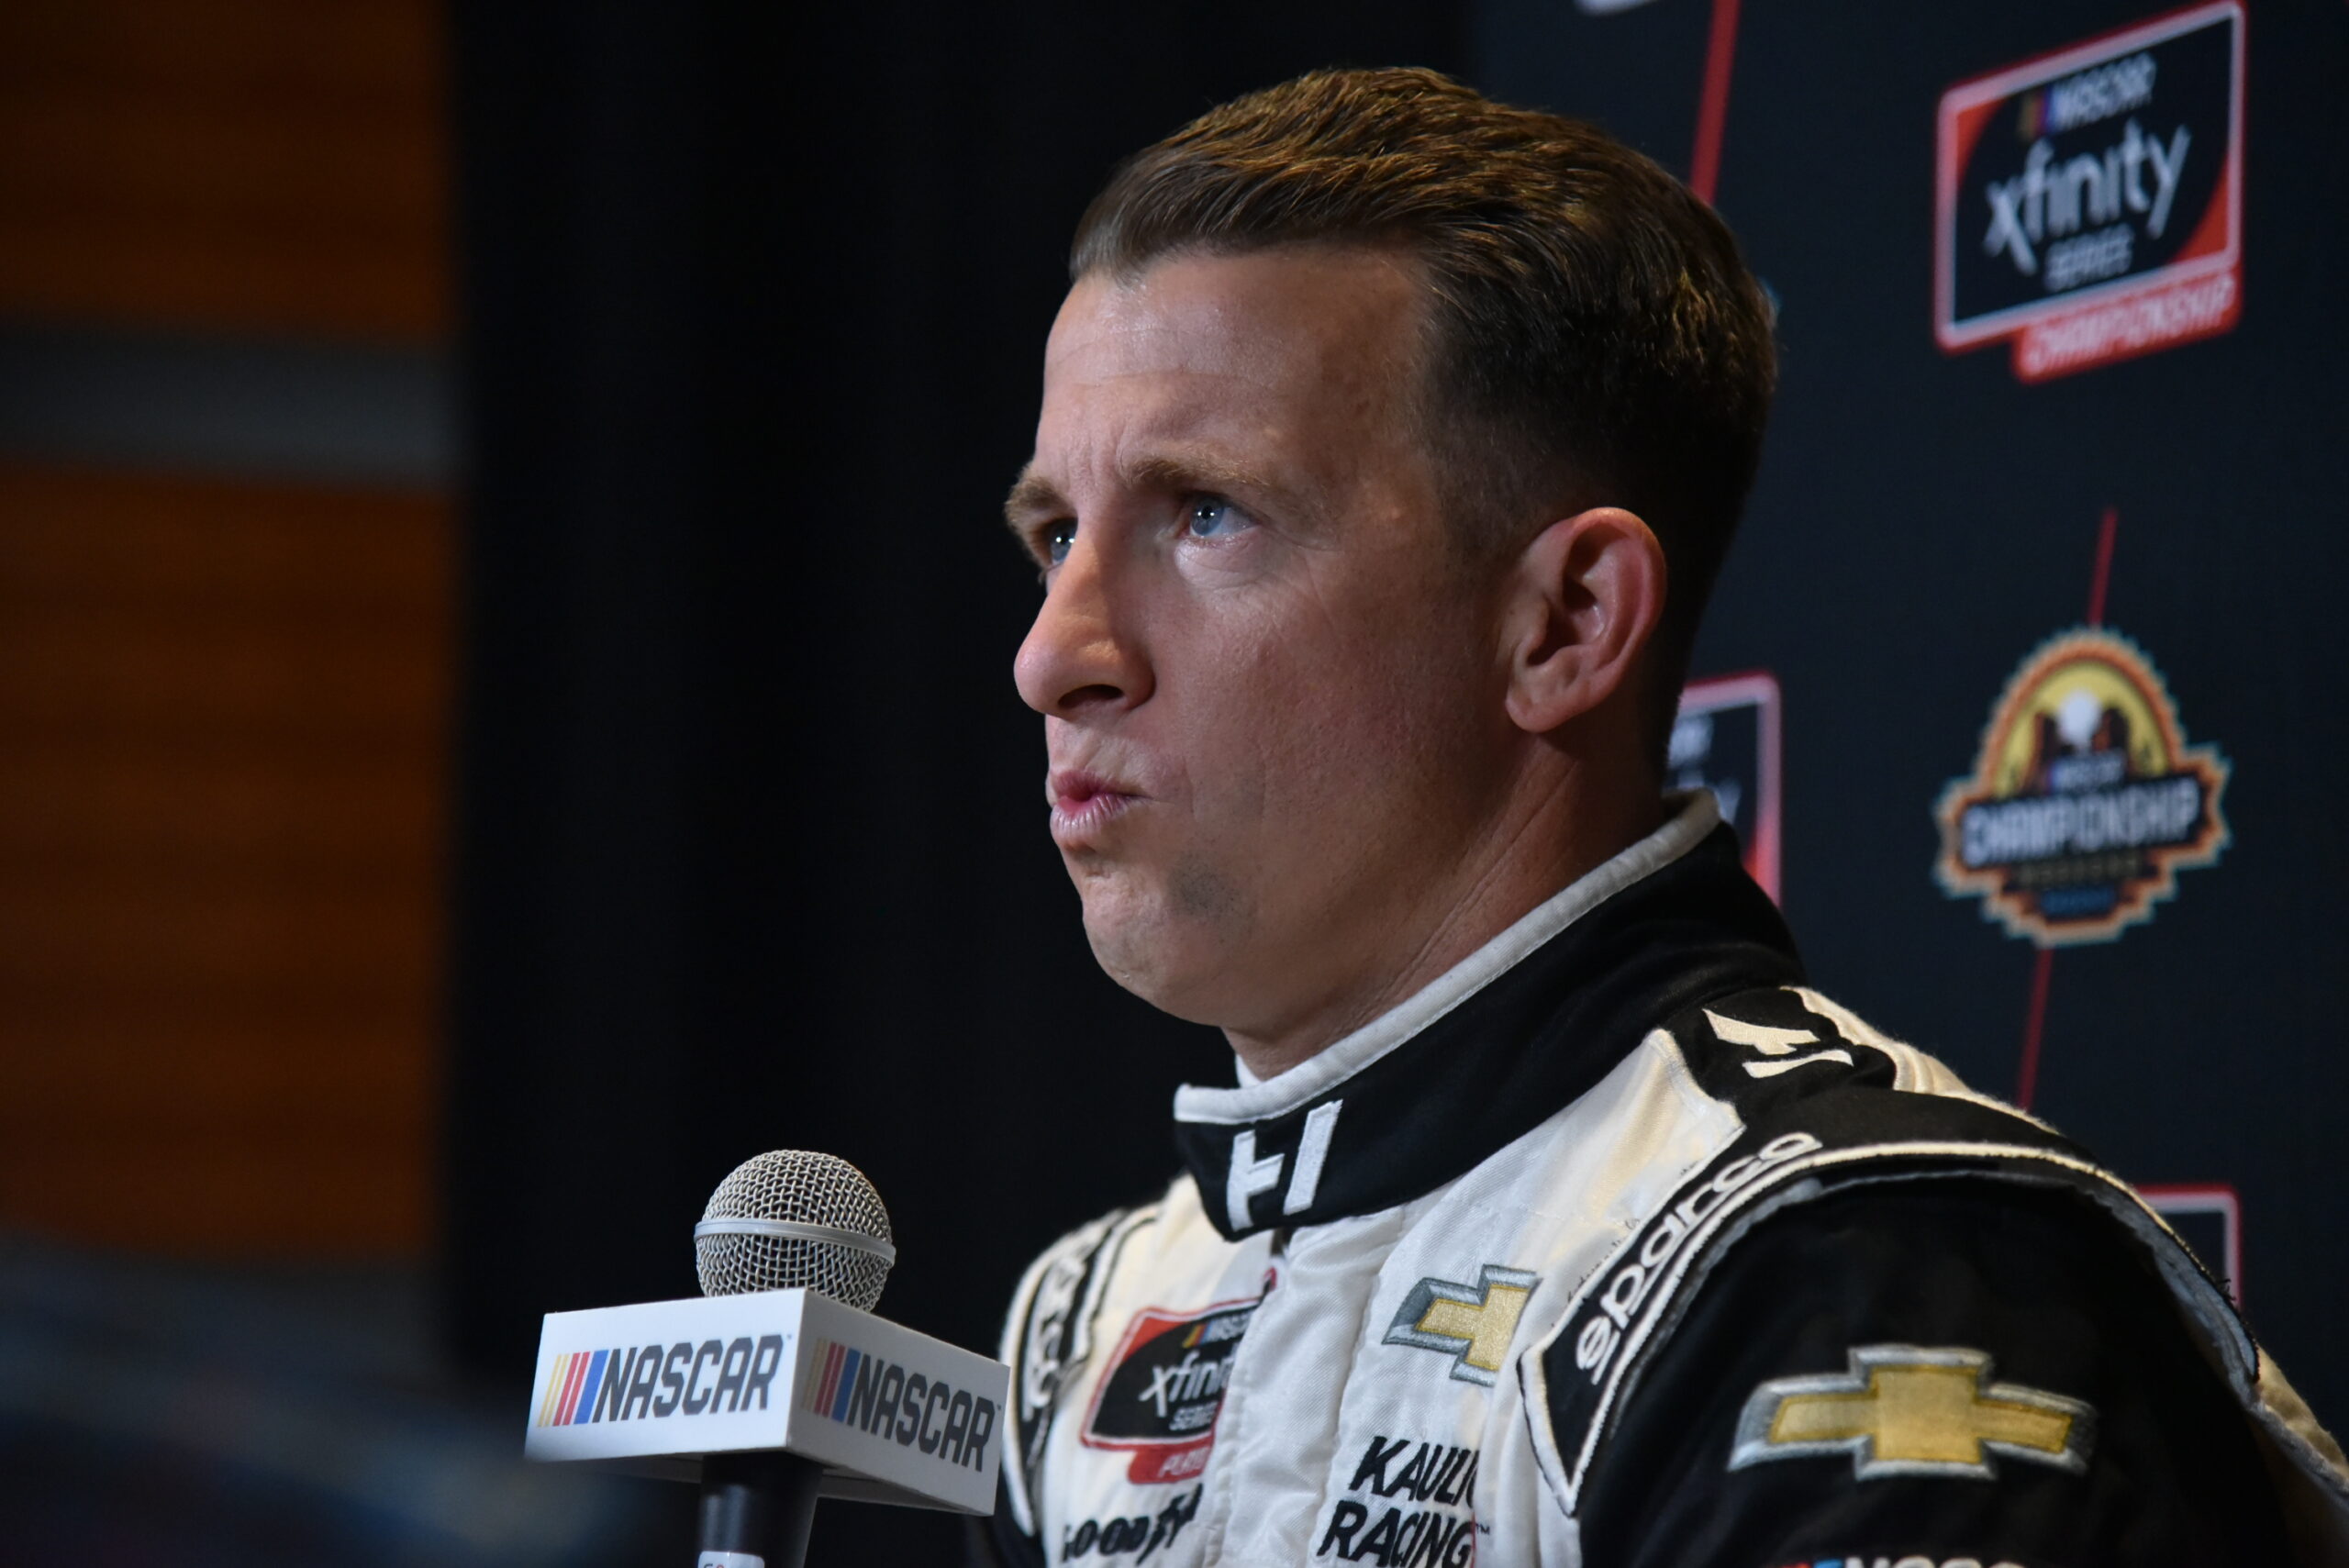 Allmendinger is always deep in thought with his illustrious racing career. (Photo: Luis Torres | The Podium Finish)